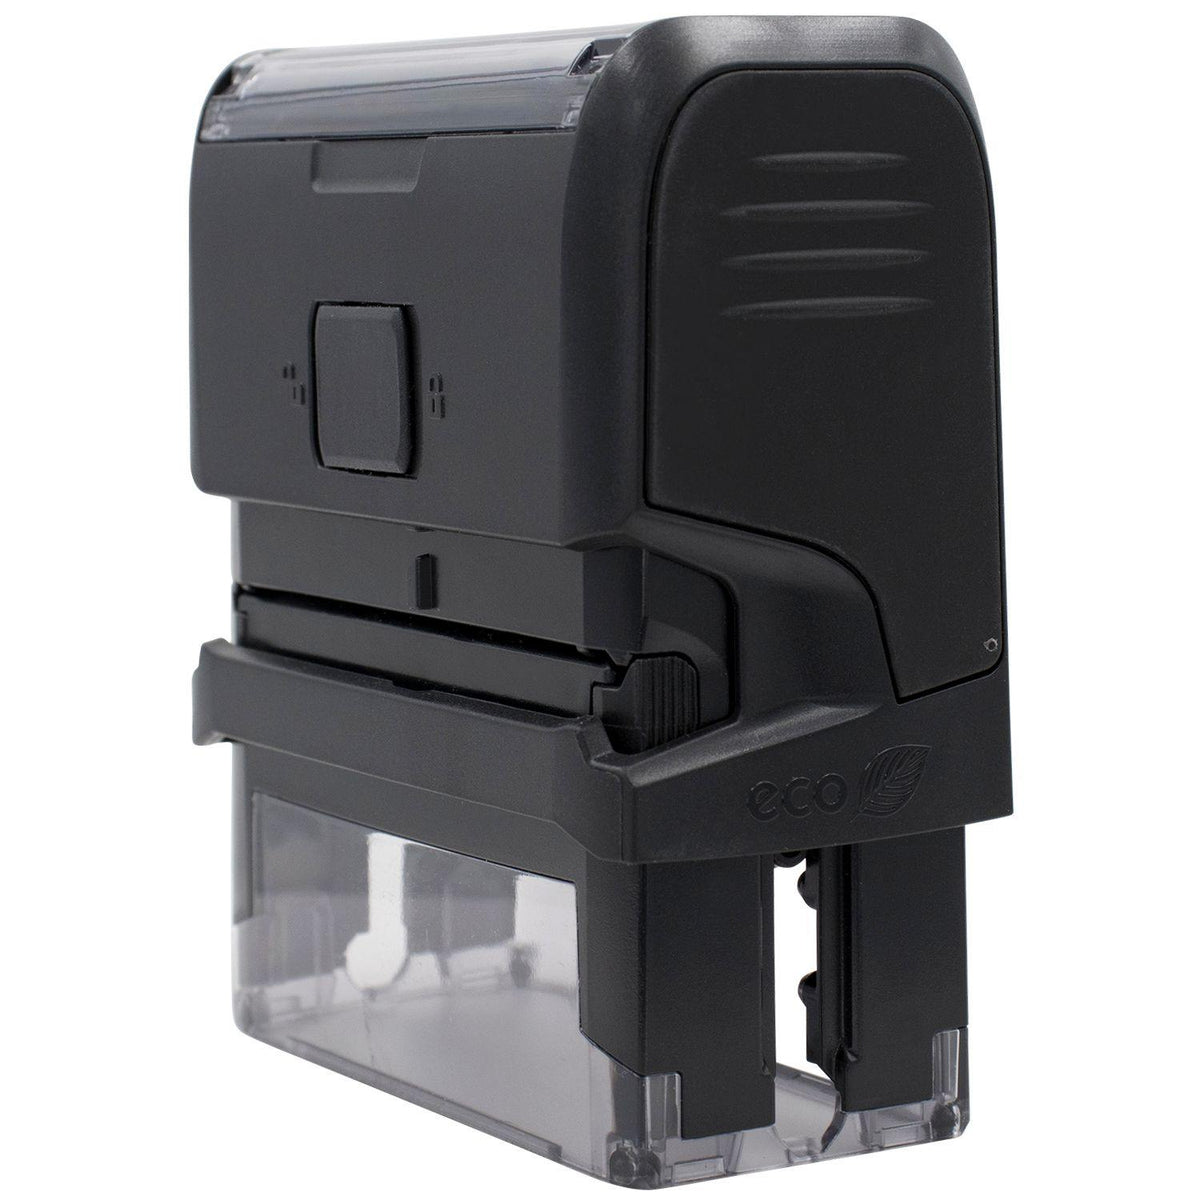 Large Self-Inking E-Mail Stamp - Engineer Seal Stamps - Brand_Trodat, Impression Size_Large, Stamp Type_Self-Inking Stamp, Type of Use_General, Type of Use_Office